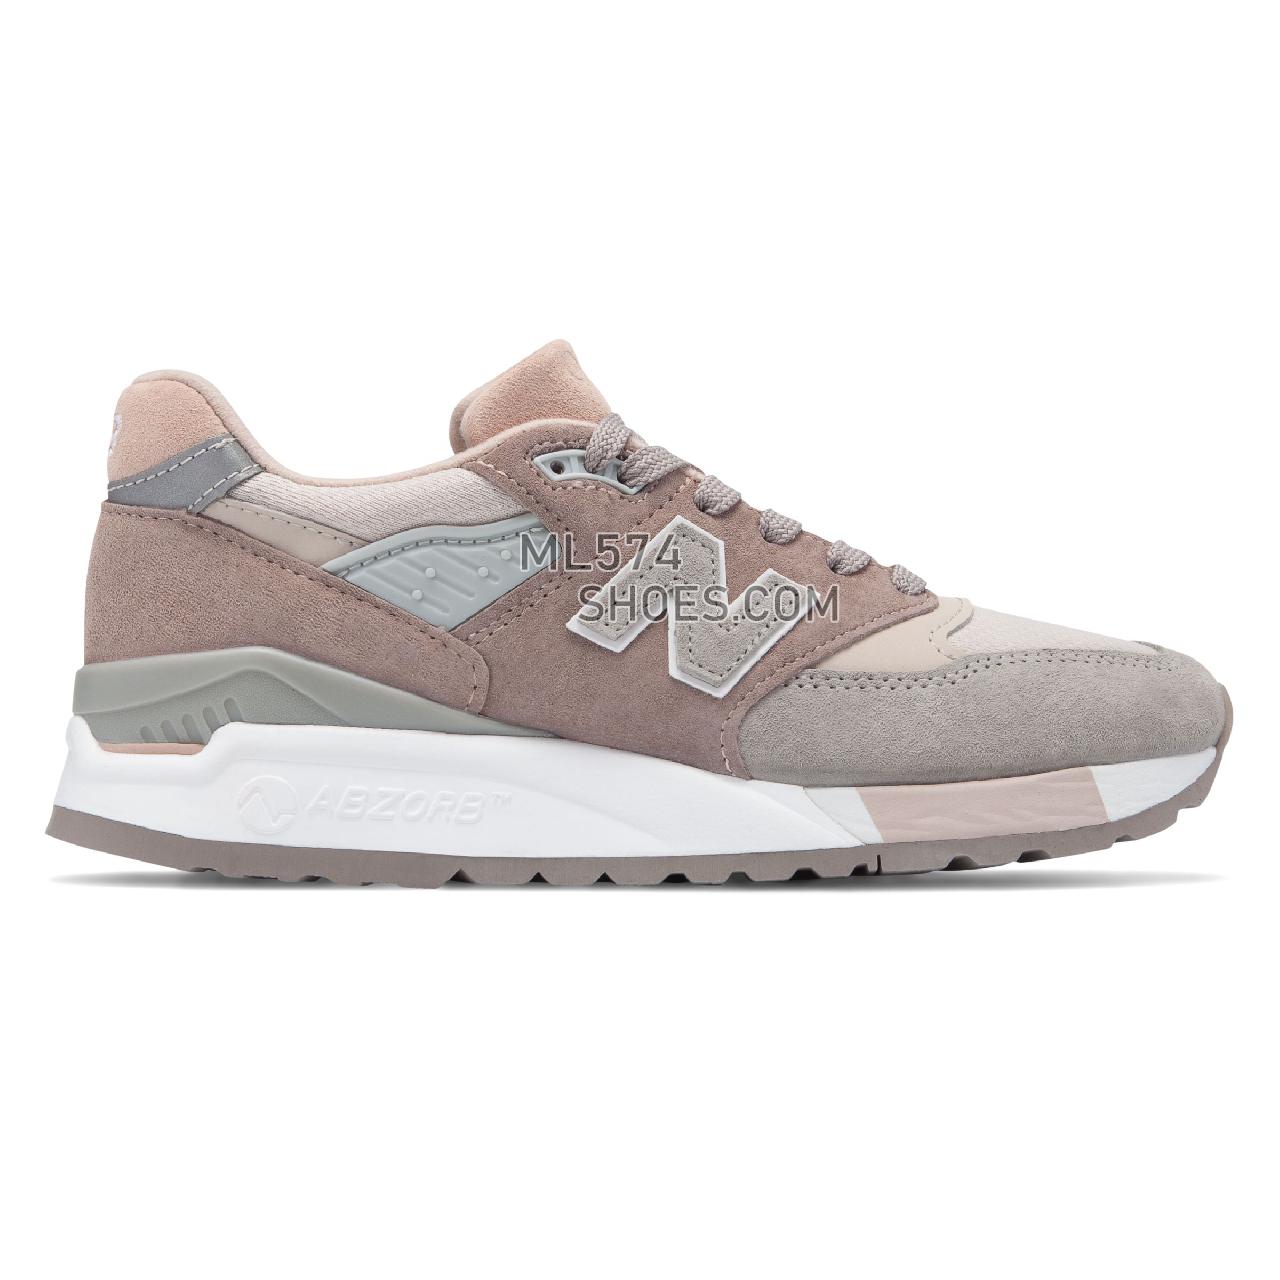 New Balance Made in US 998 - Men's 998 Made in US Classic W998-PM - Grey with White - W998AWA